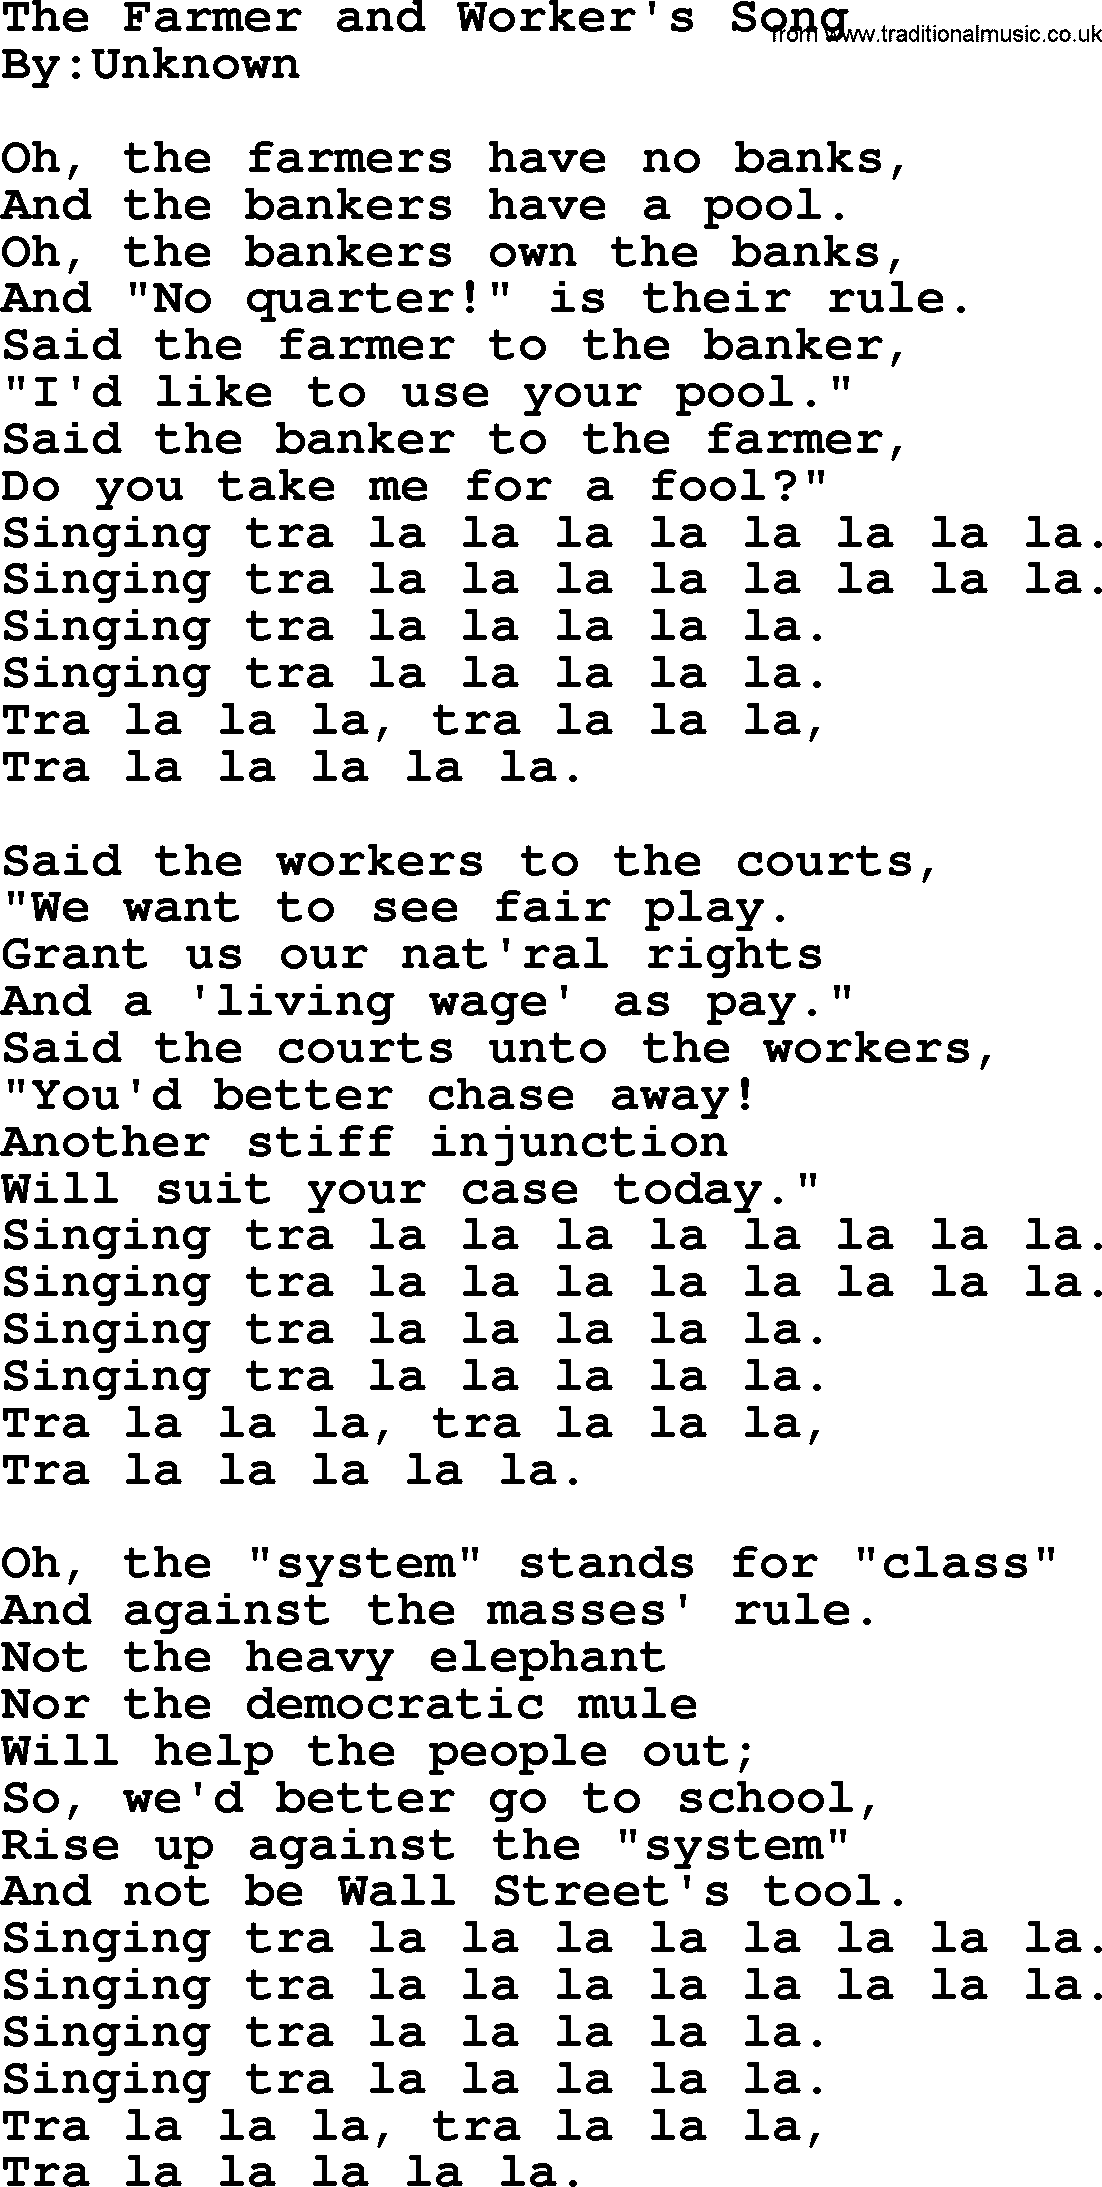 Political, Solidarity, Workers or Union song: The Farmer And Workers Song, lyrics